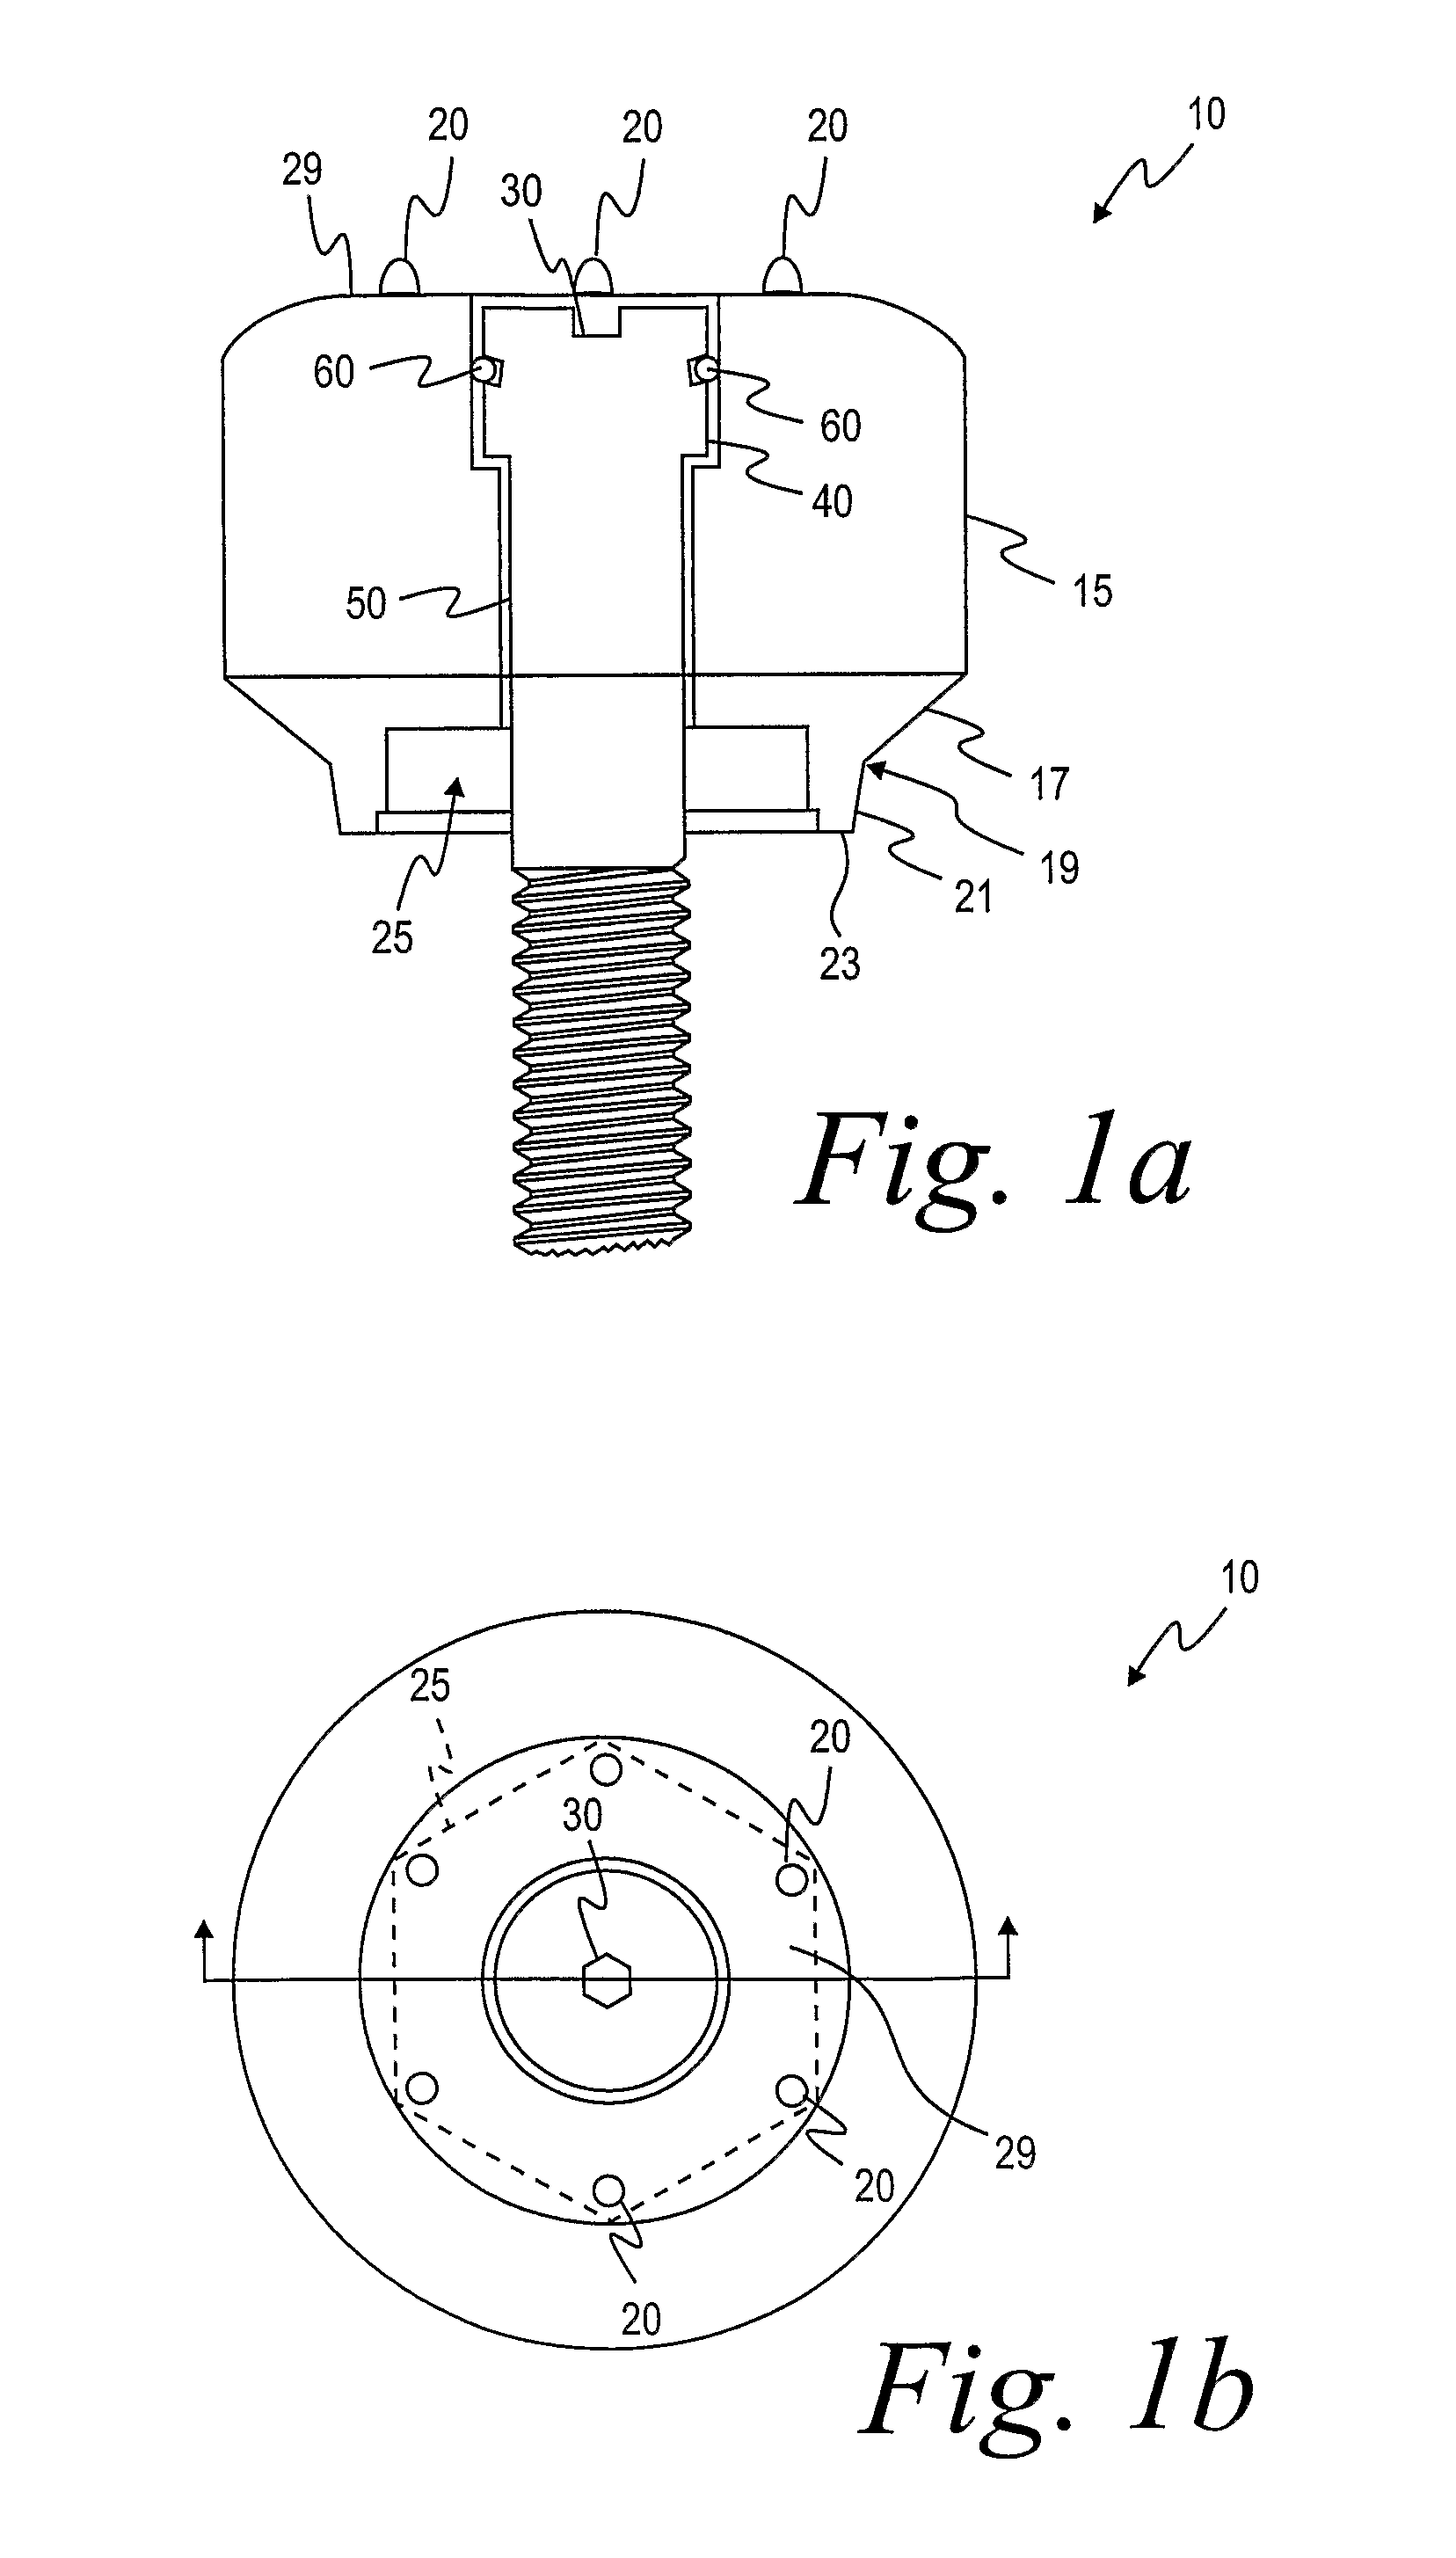 Method for manufacturing dental implant components